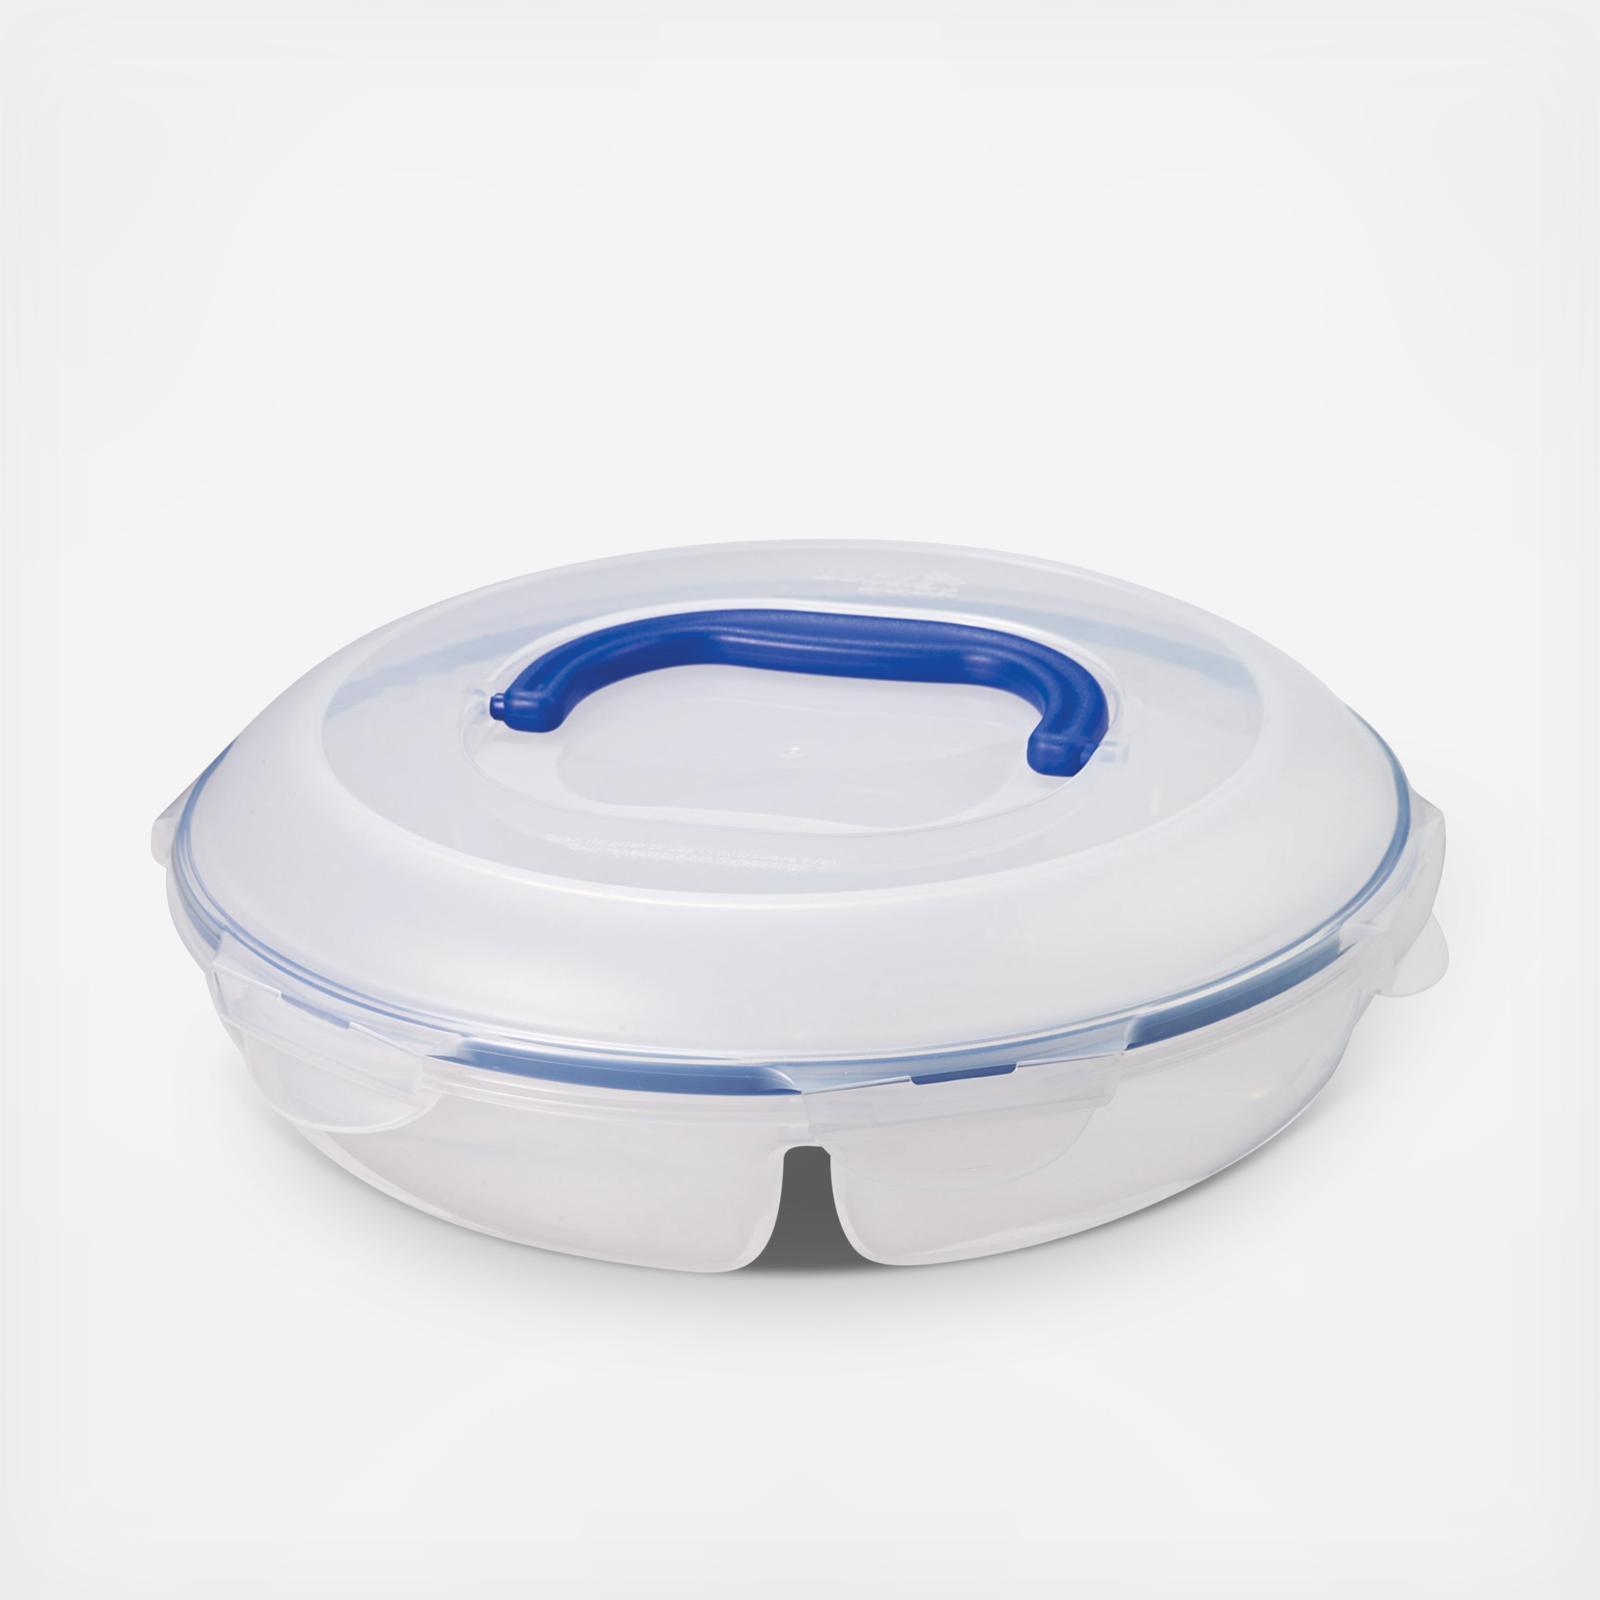 Lock&lock 16-Fluid Ounce Rectangular Food Container with Tray, Butter Keeper